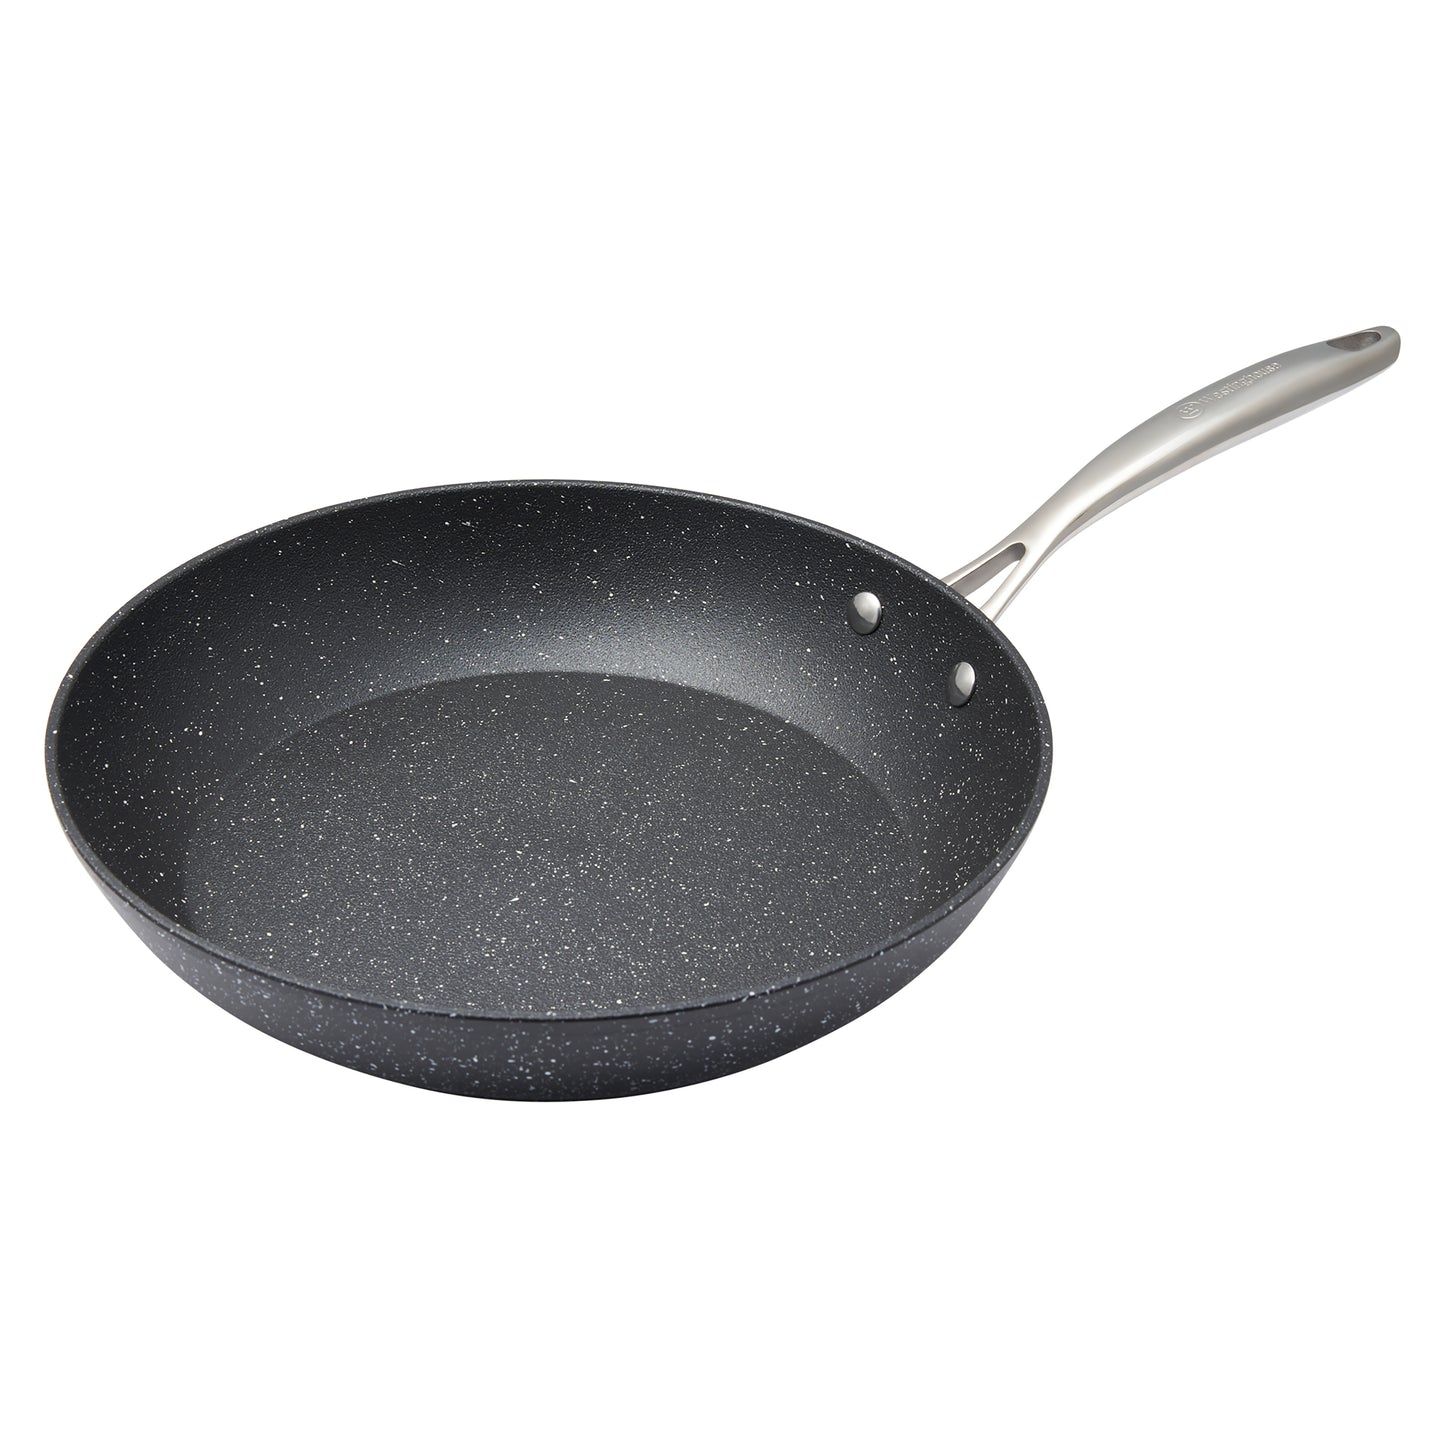 Westinghouse Fry Pan Set 2 Piece Forged Steel